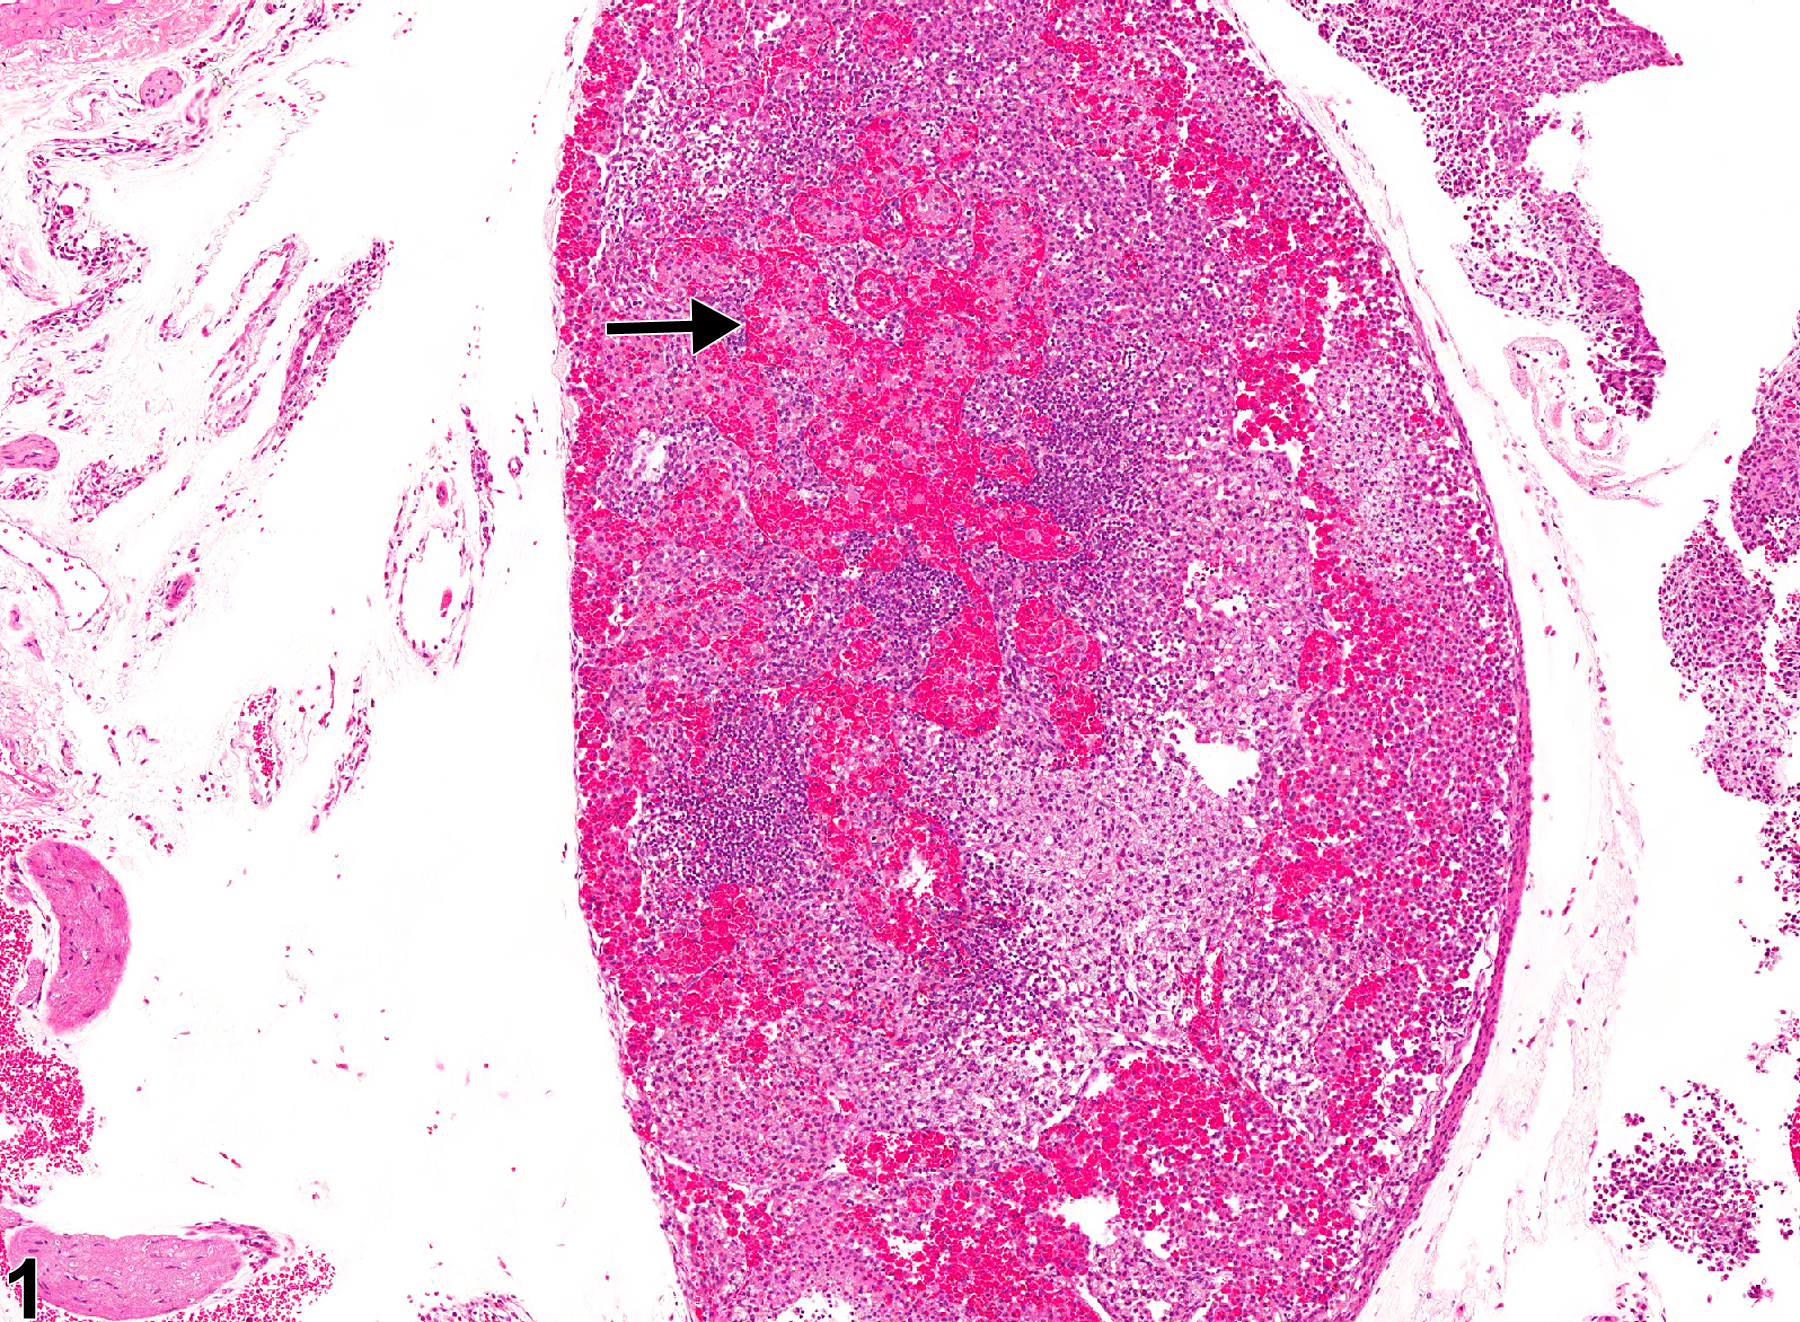 Image of sinus erythrocytosis in the lymph node from a female B6C3F1/N mouse in a chronic study